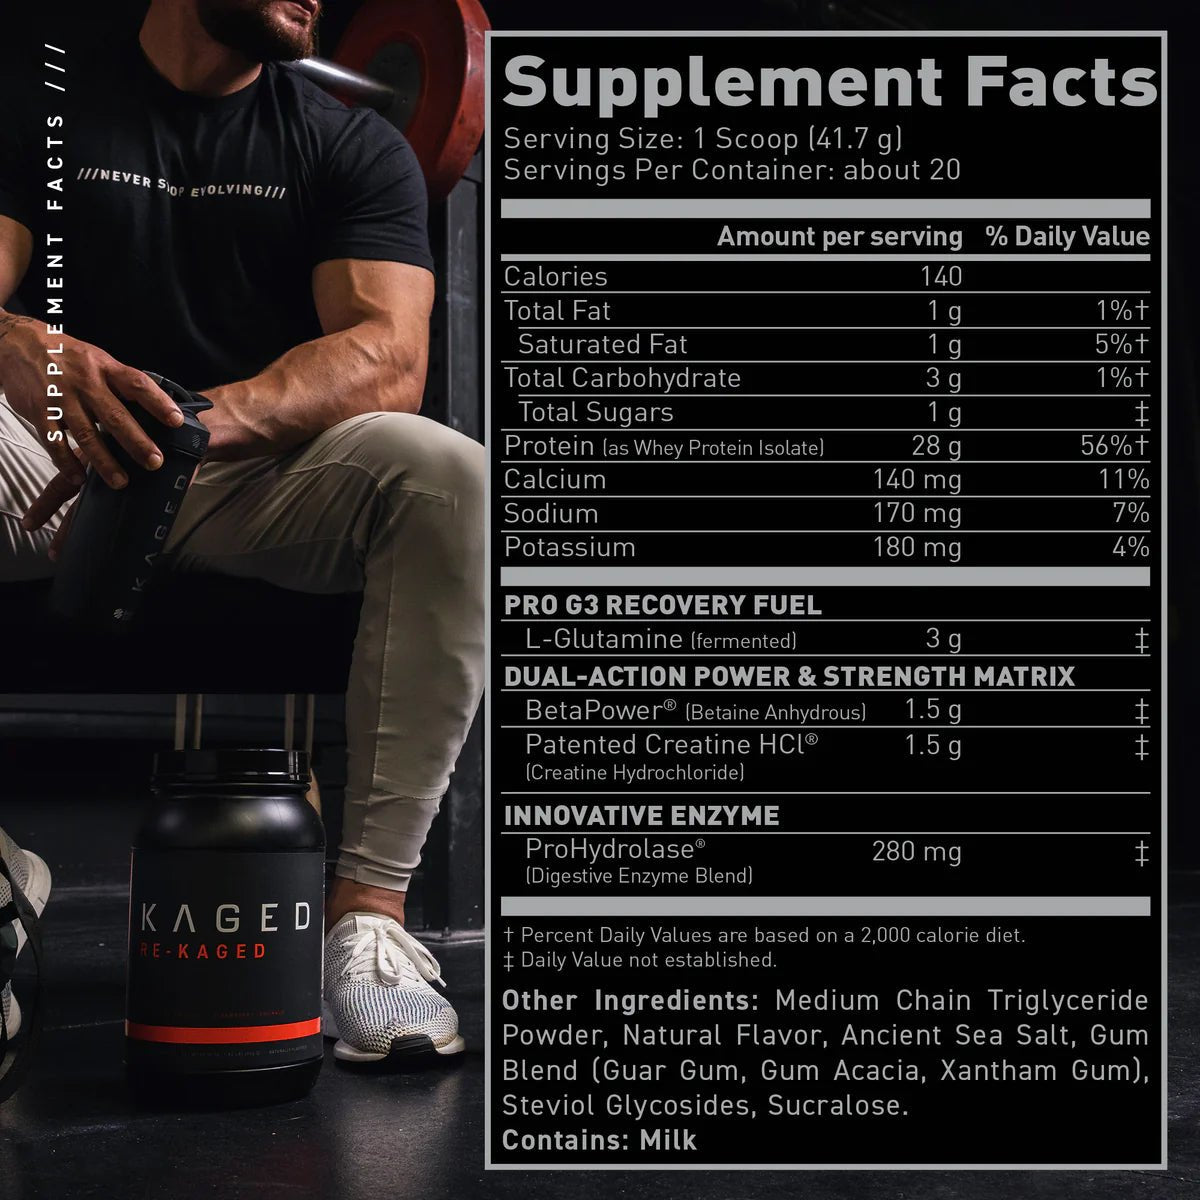 Kaged MuscleRe-Kaged - Post-Workout Protein PowderPost-Workout Protein PowderRED SUPPS